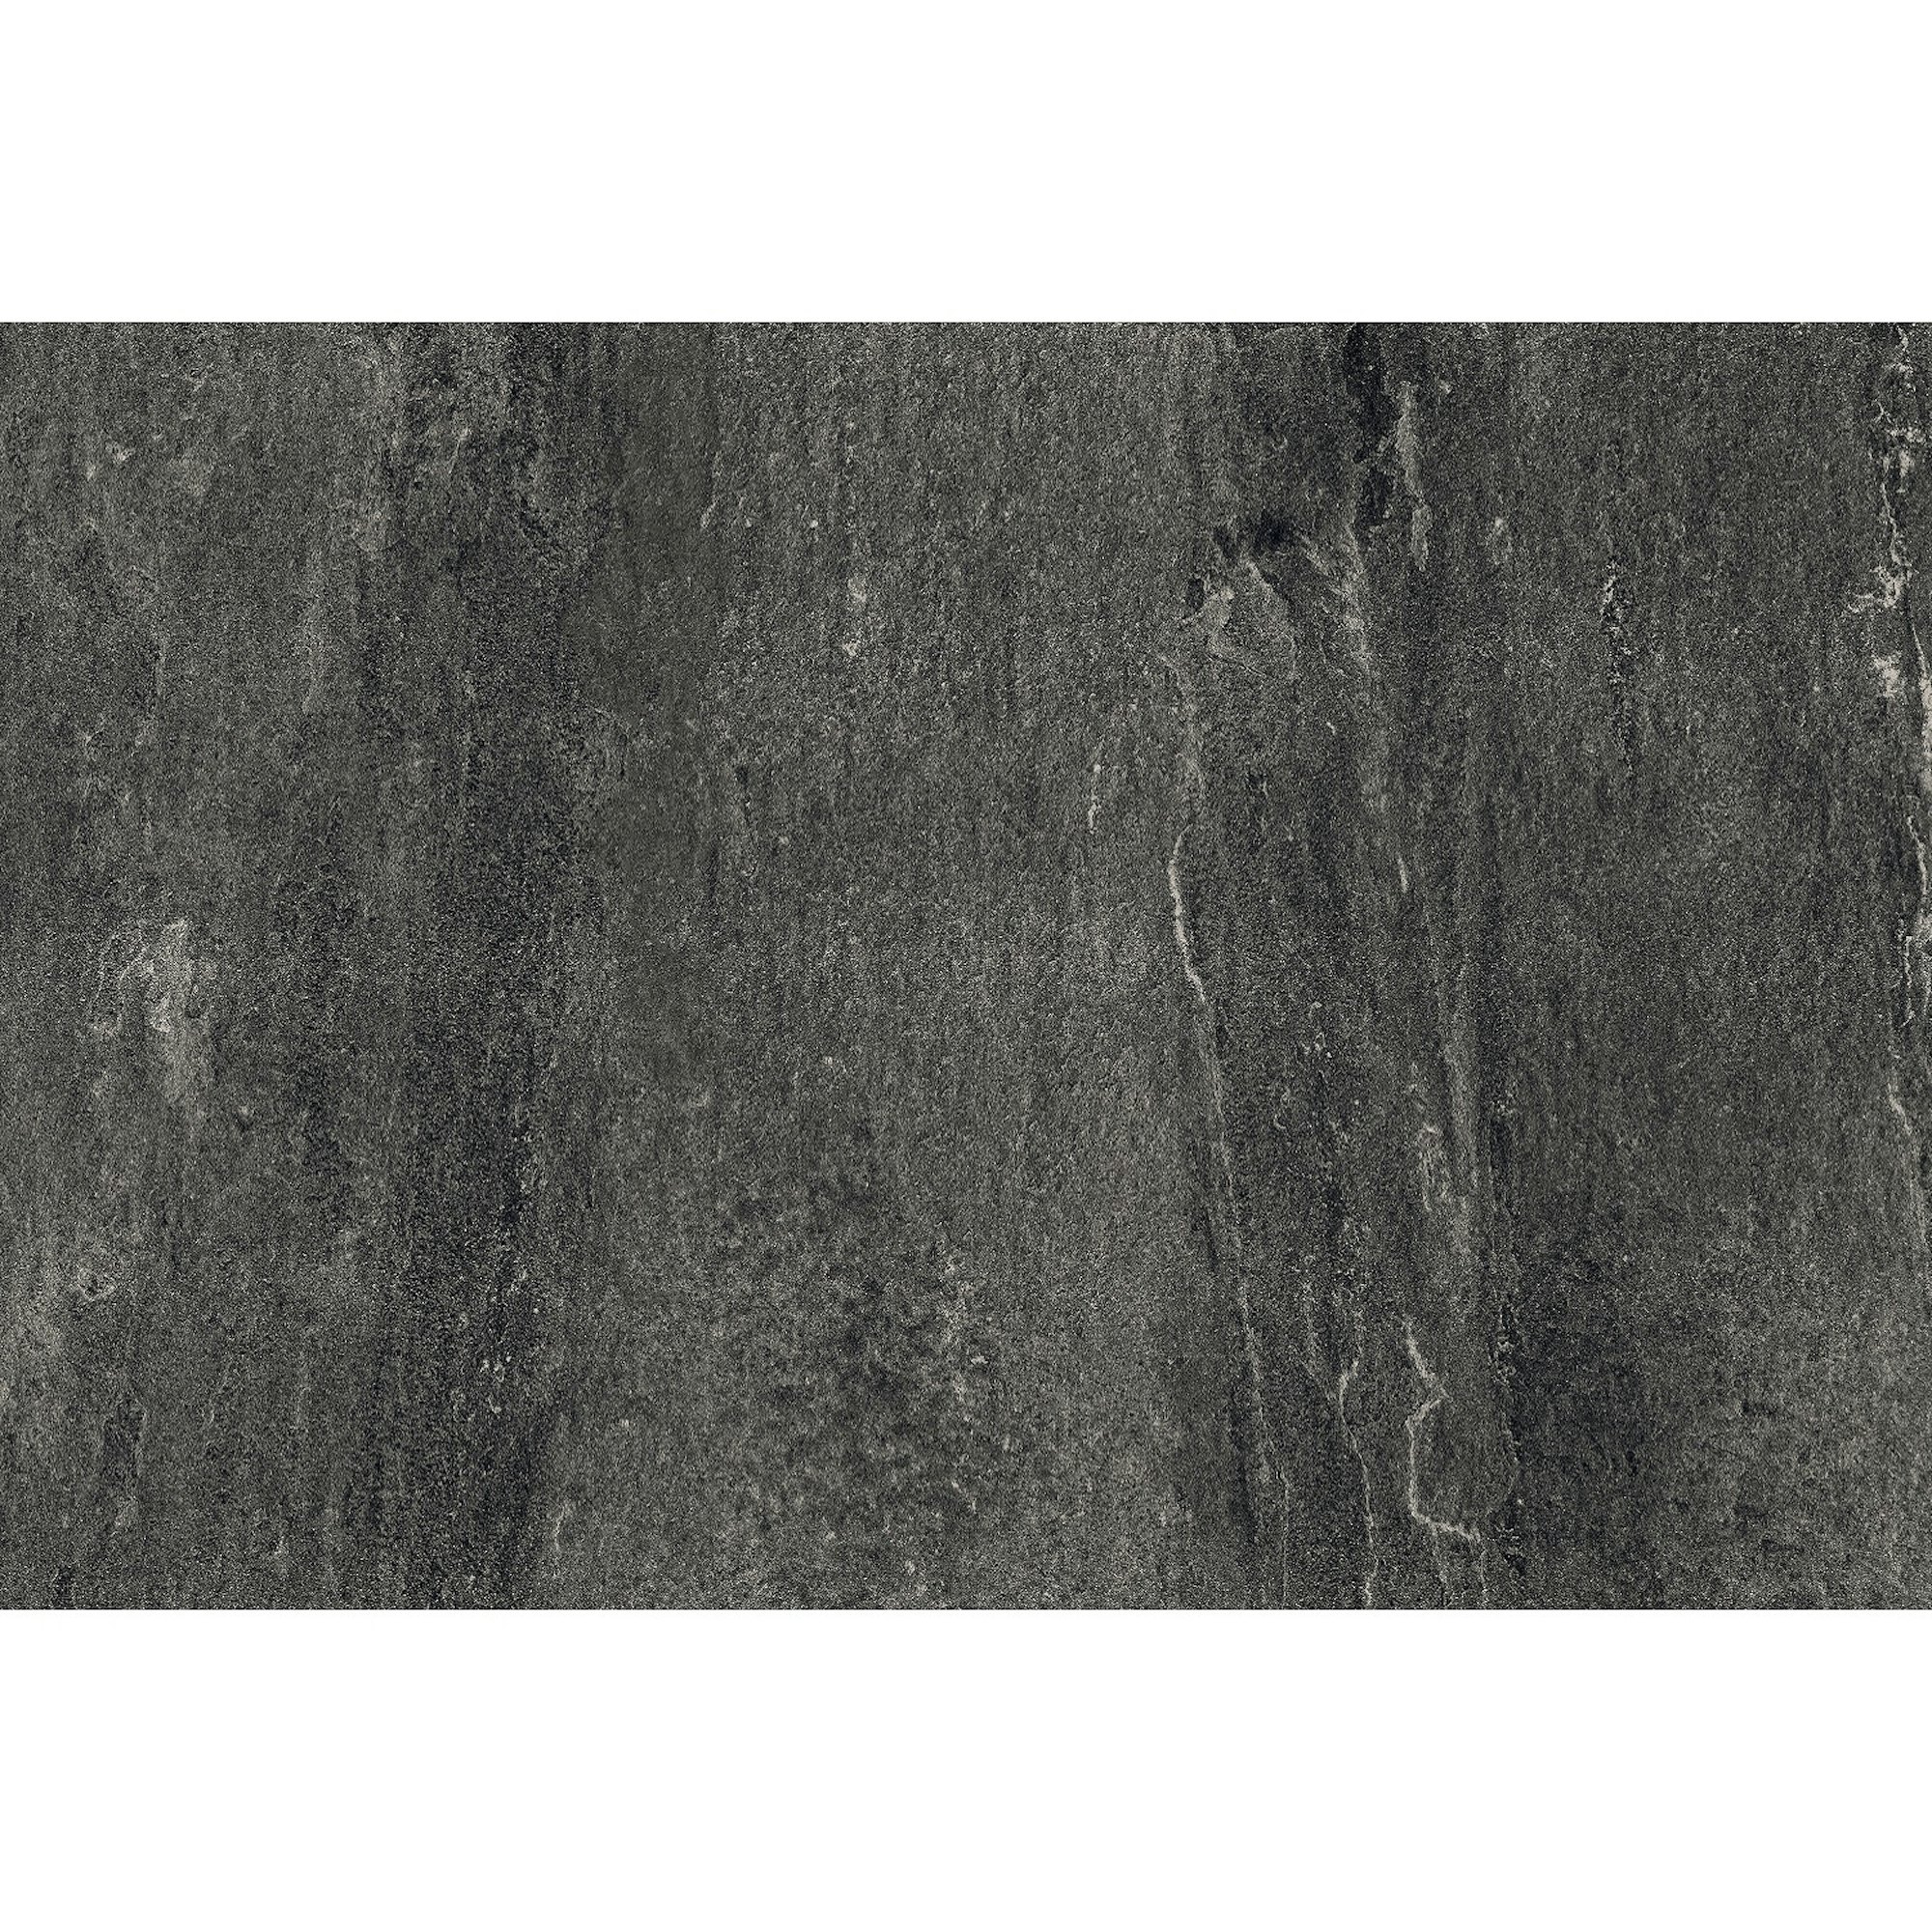 Evergreen Anthracite Stone Outdoor 20mm Tile